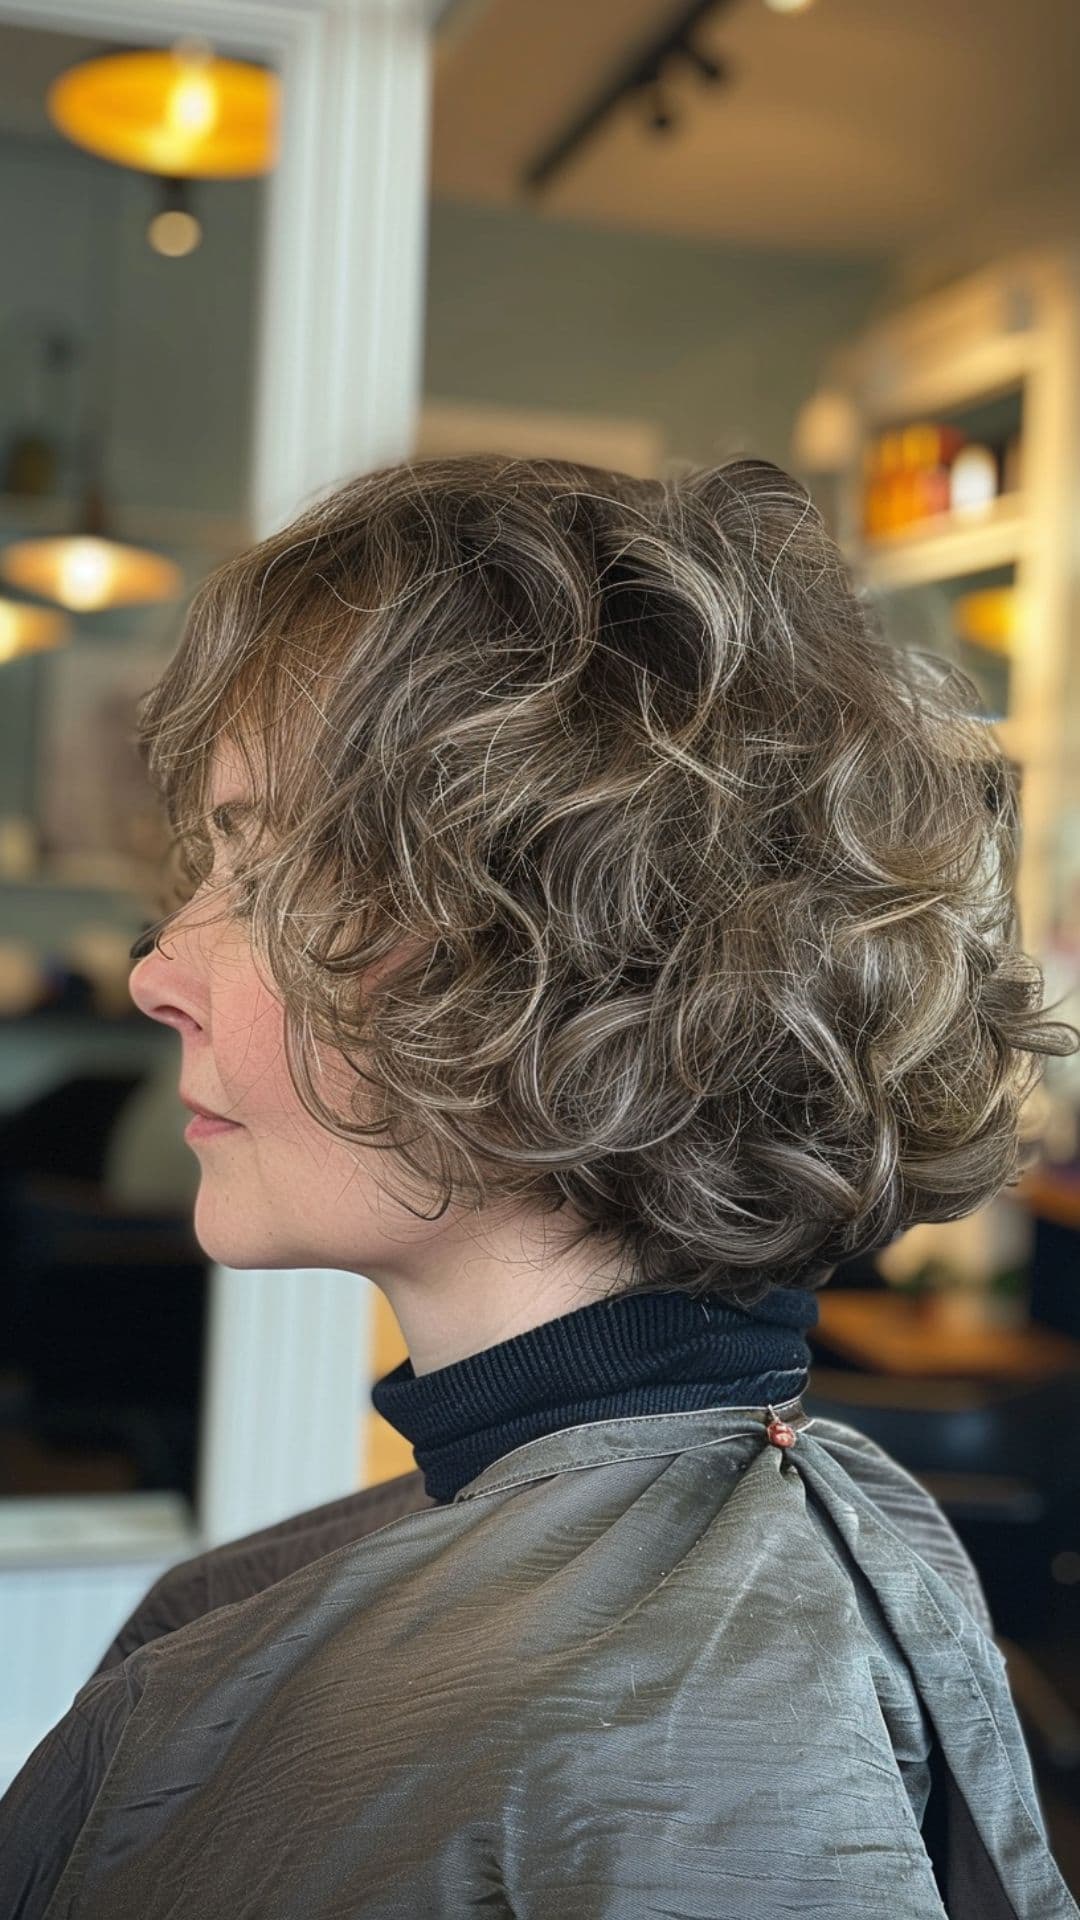 An old woman modelling a curly bob.